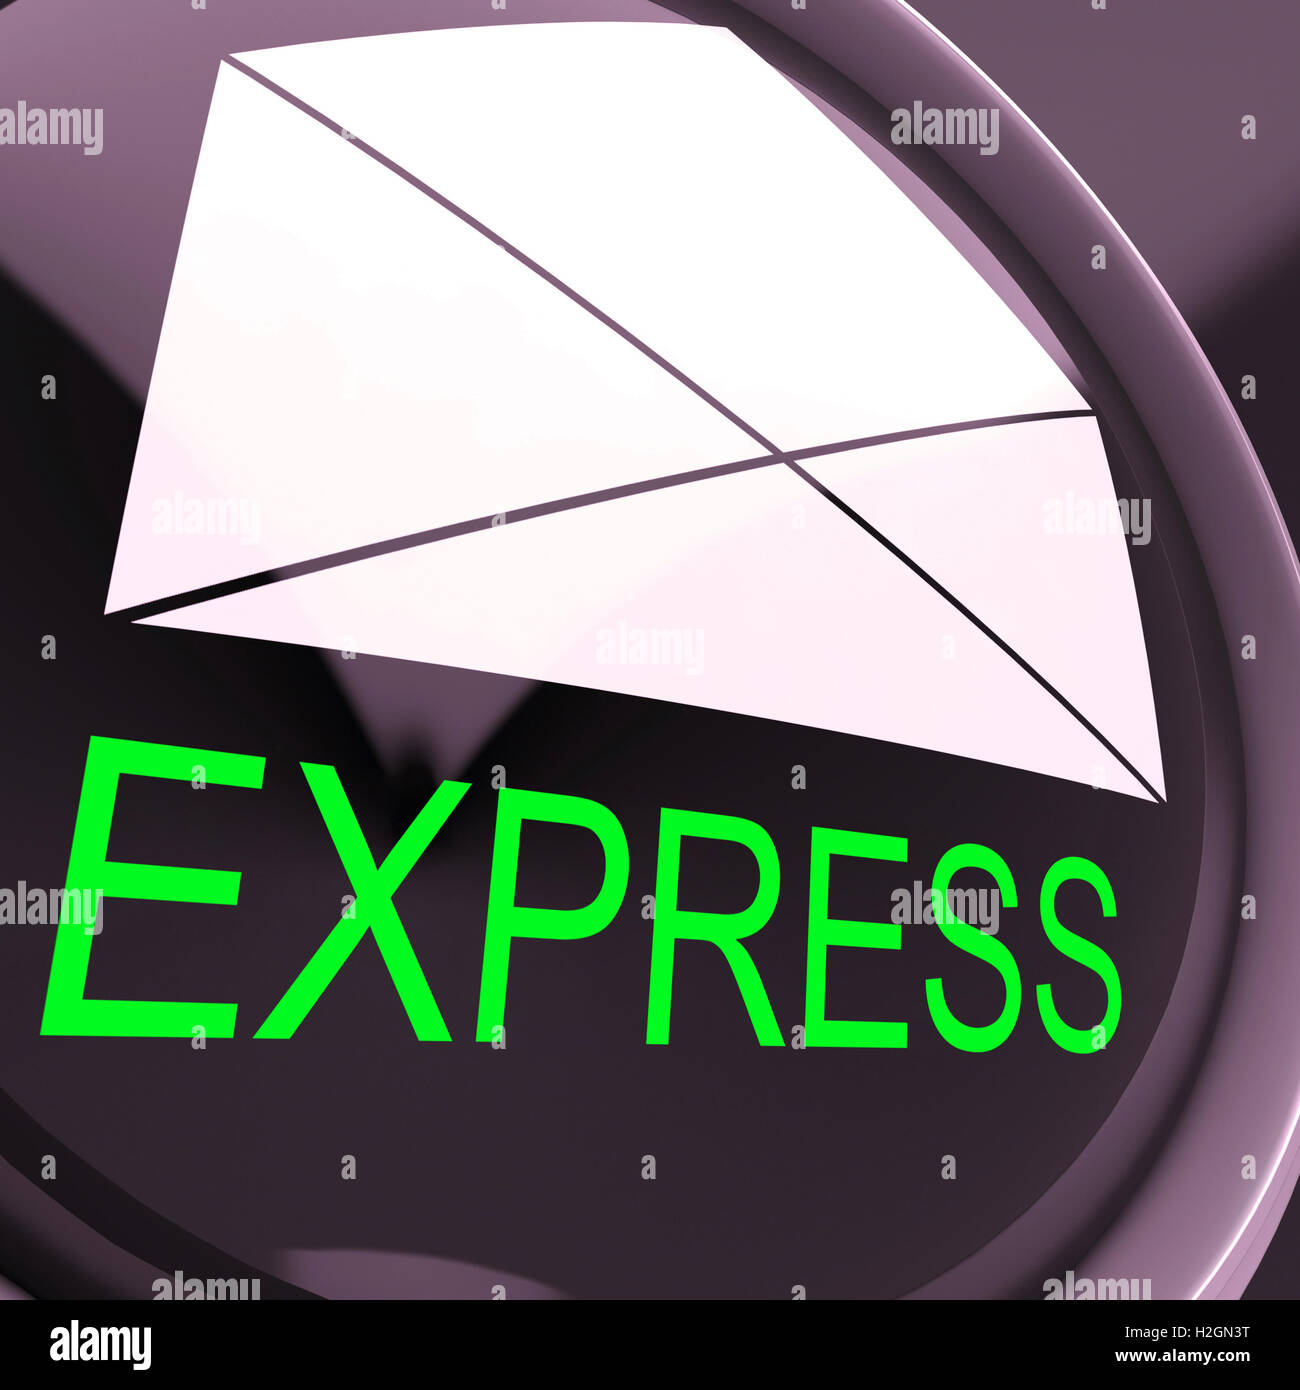 Express Envelope Means Fast And Priority Post Stock Photo